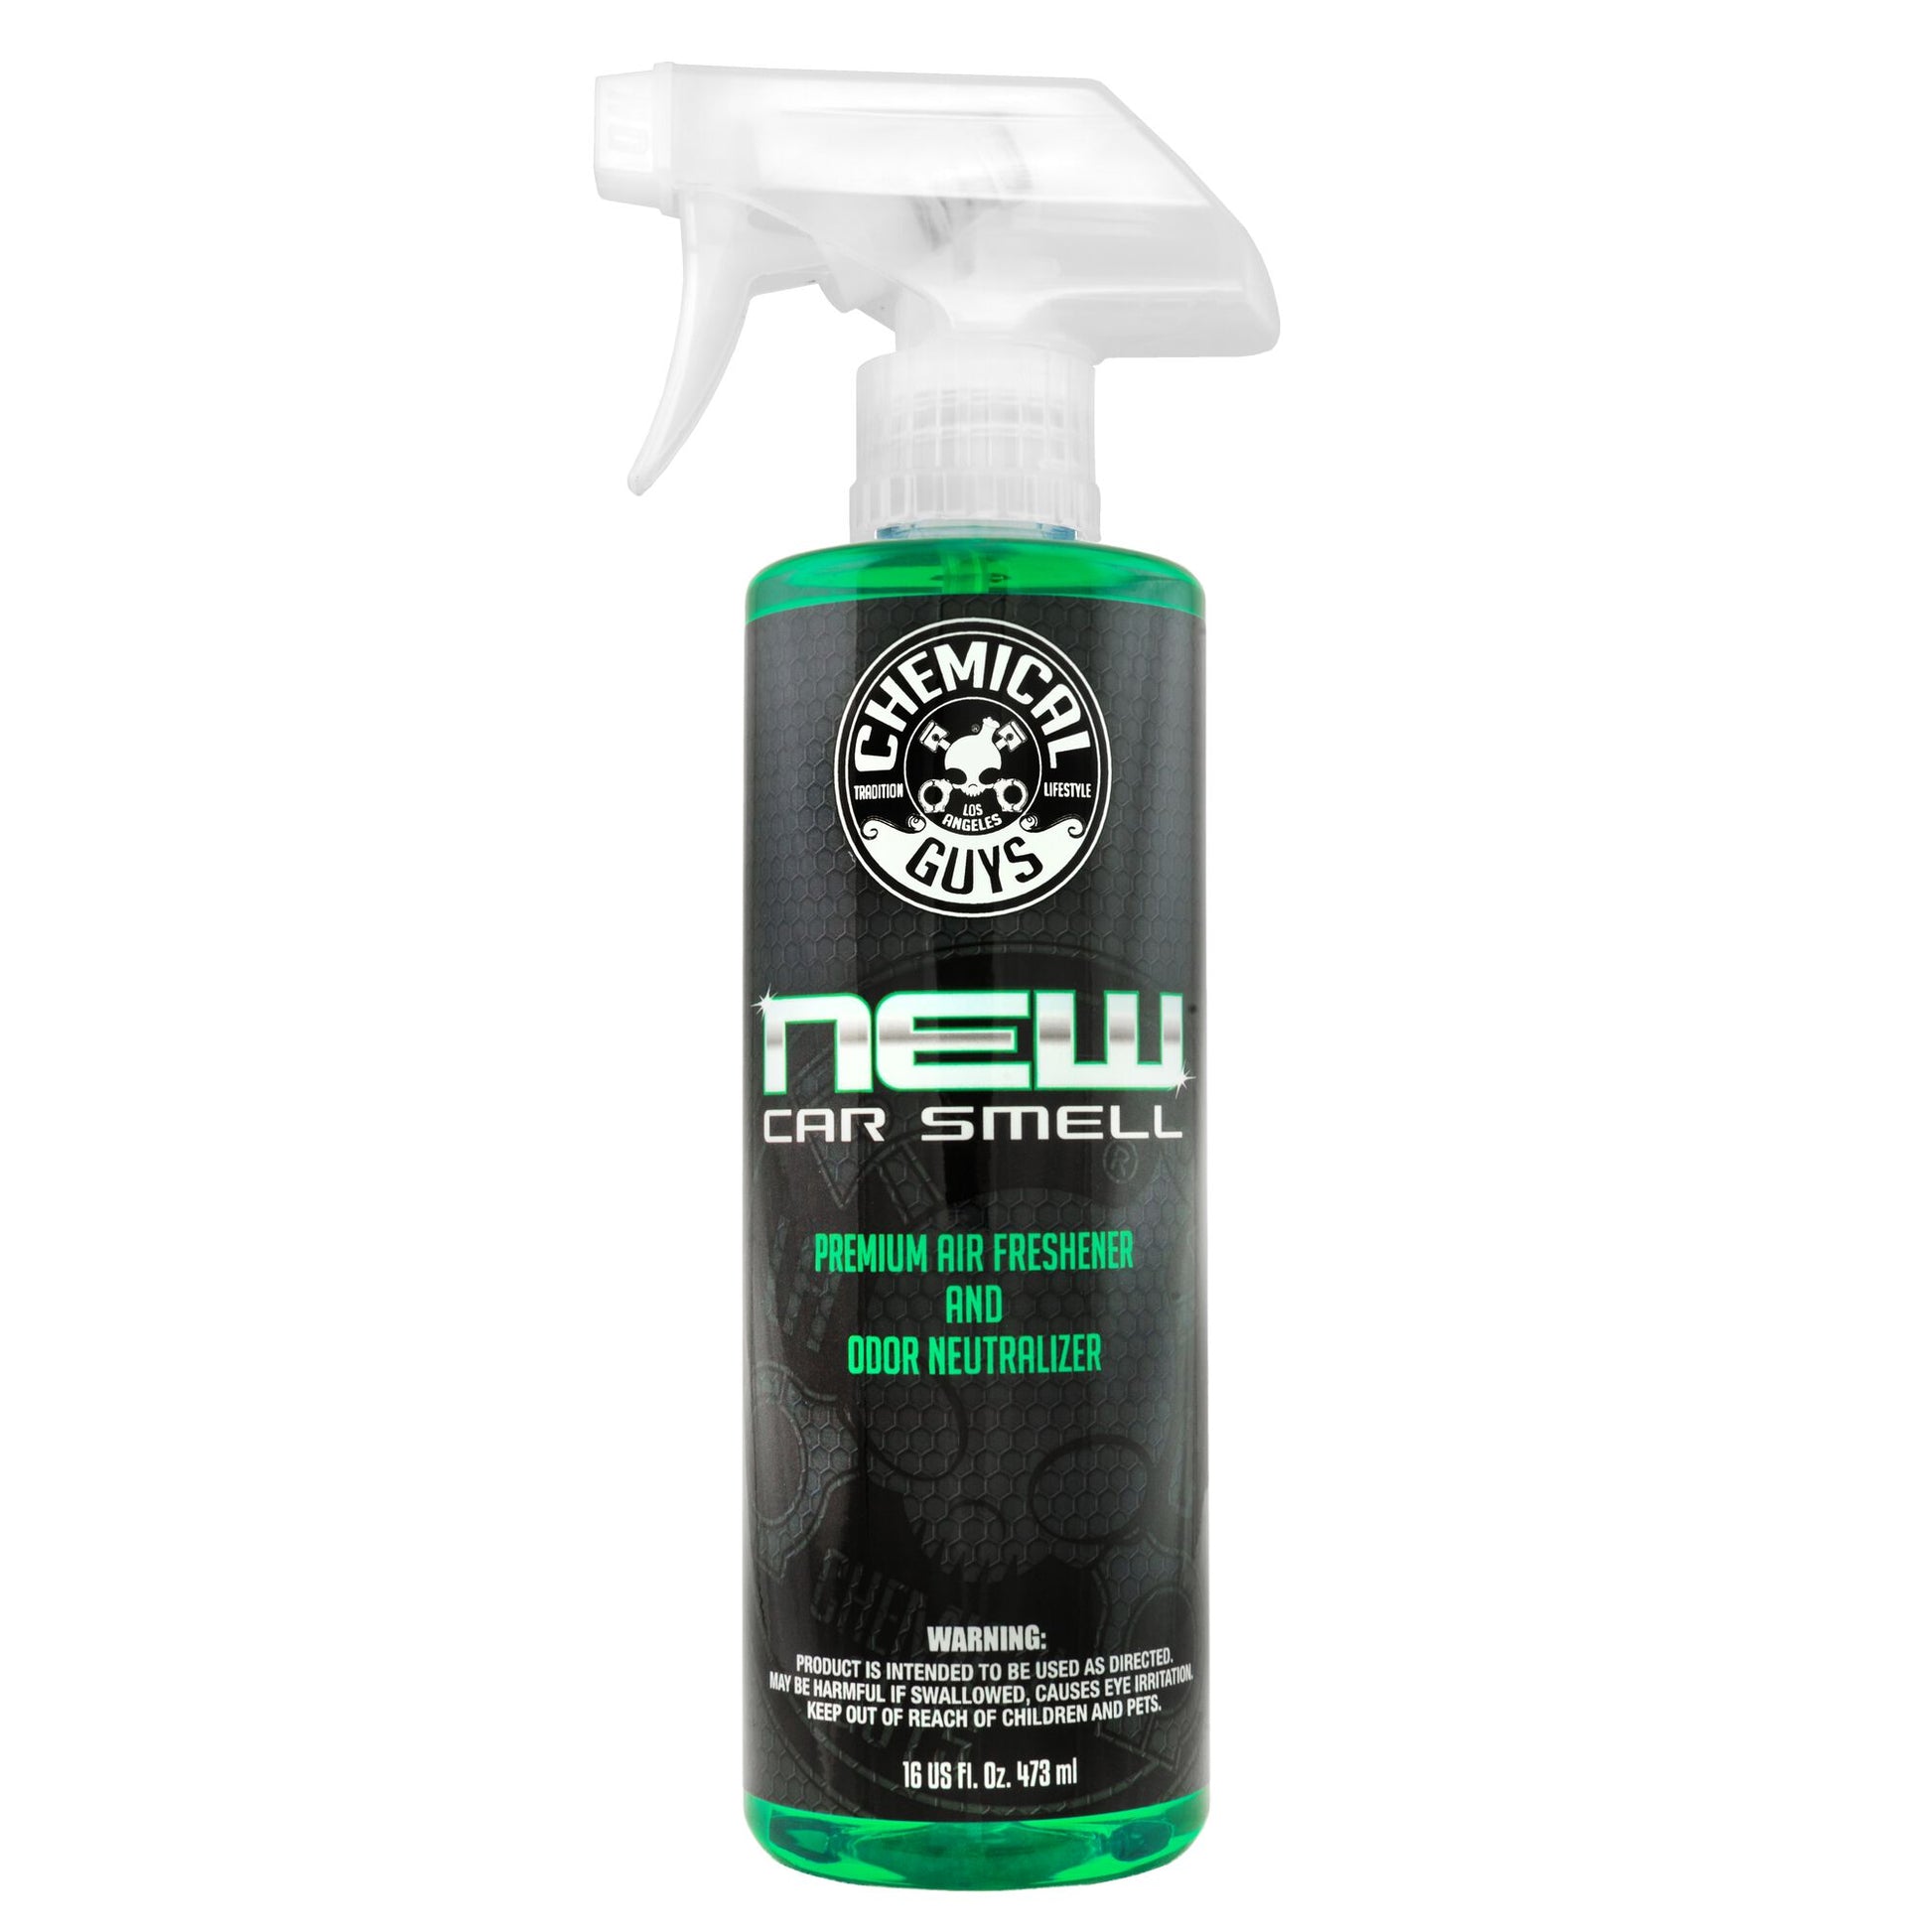 Meguiar's All Surface Interior Cleaner - All Purpose Interior Cleaner  Quickly and Safely Cleans All Your Interior Surfaces and Leaves Behind a  Pleasant Scent - Premium Auto Interior Cleaner, 16oz